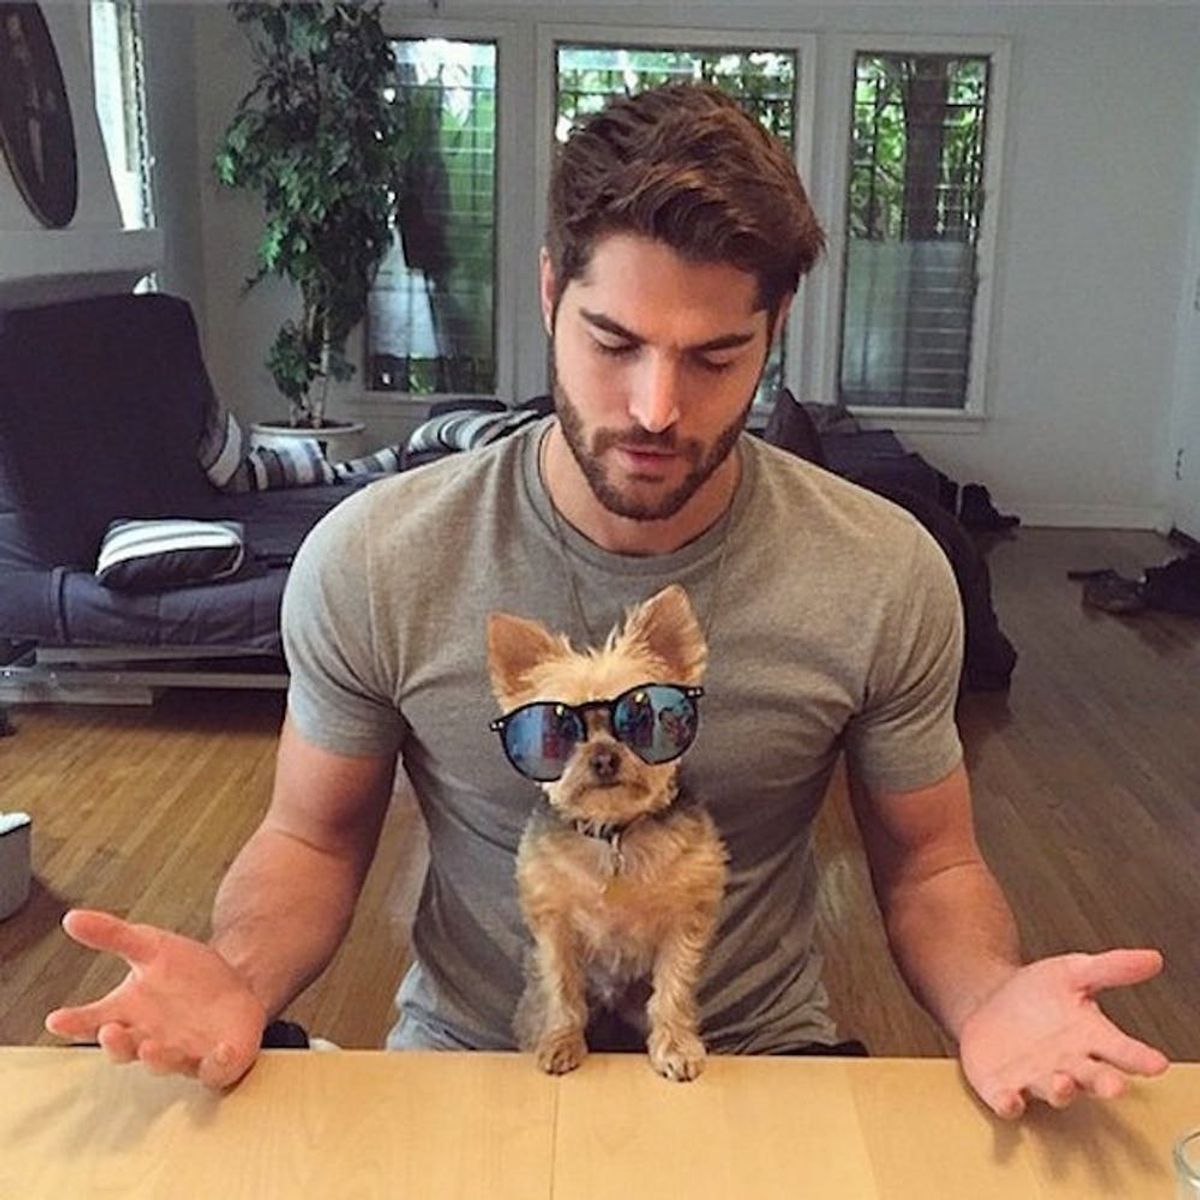 Hot Dudes + Dogs = Your New Favorite Instagram Account